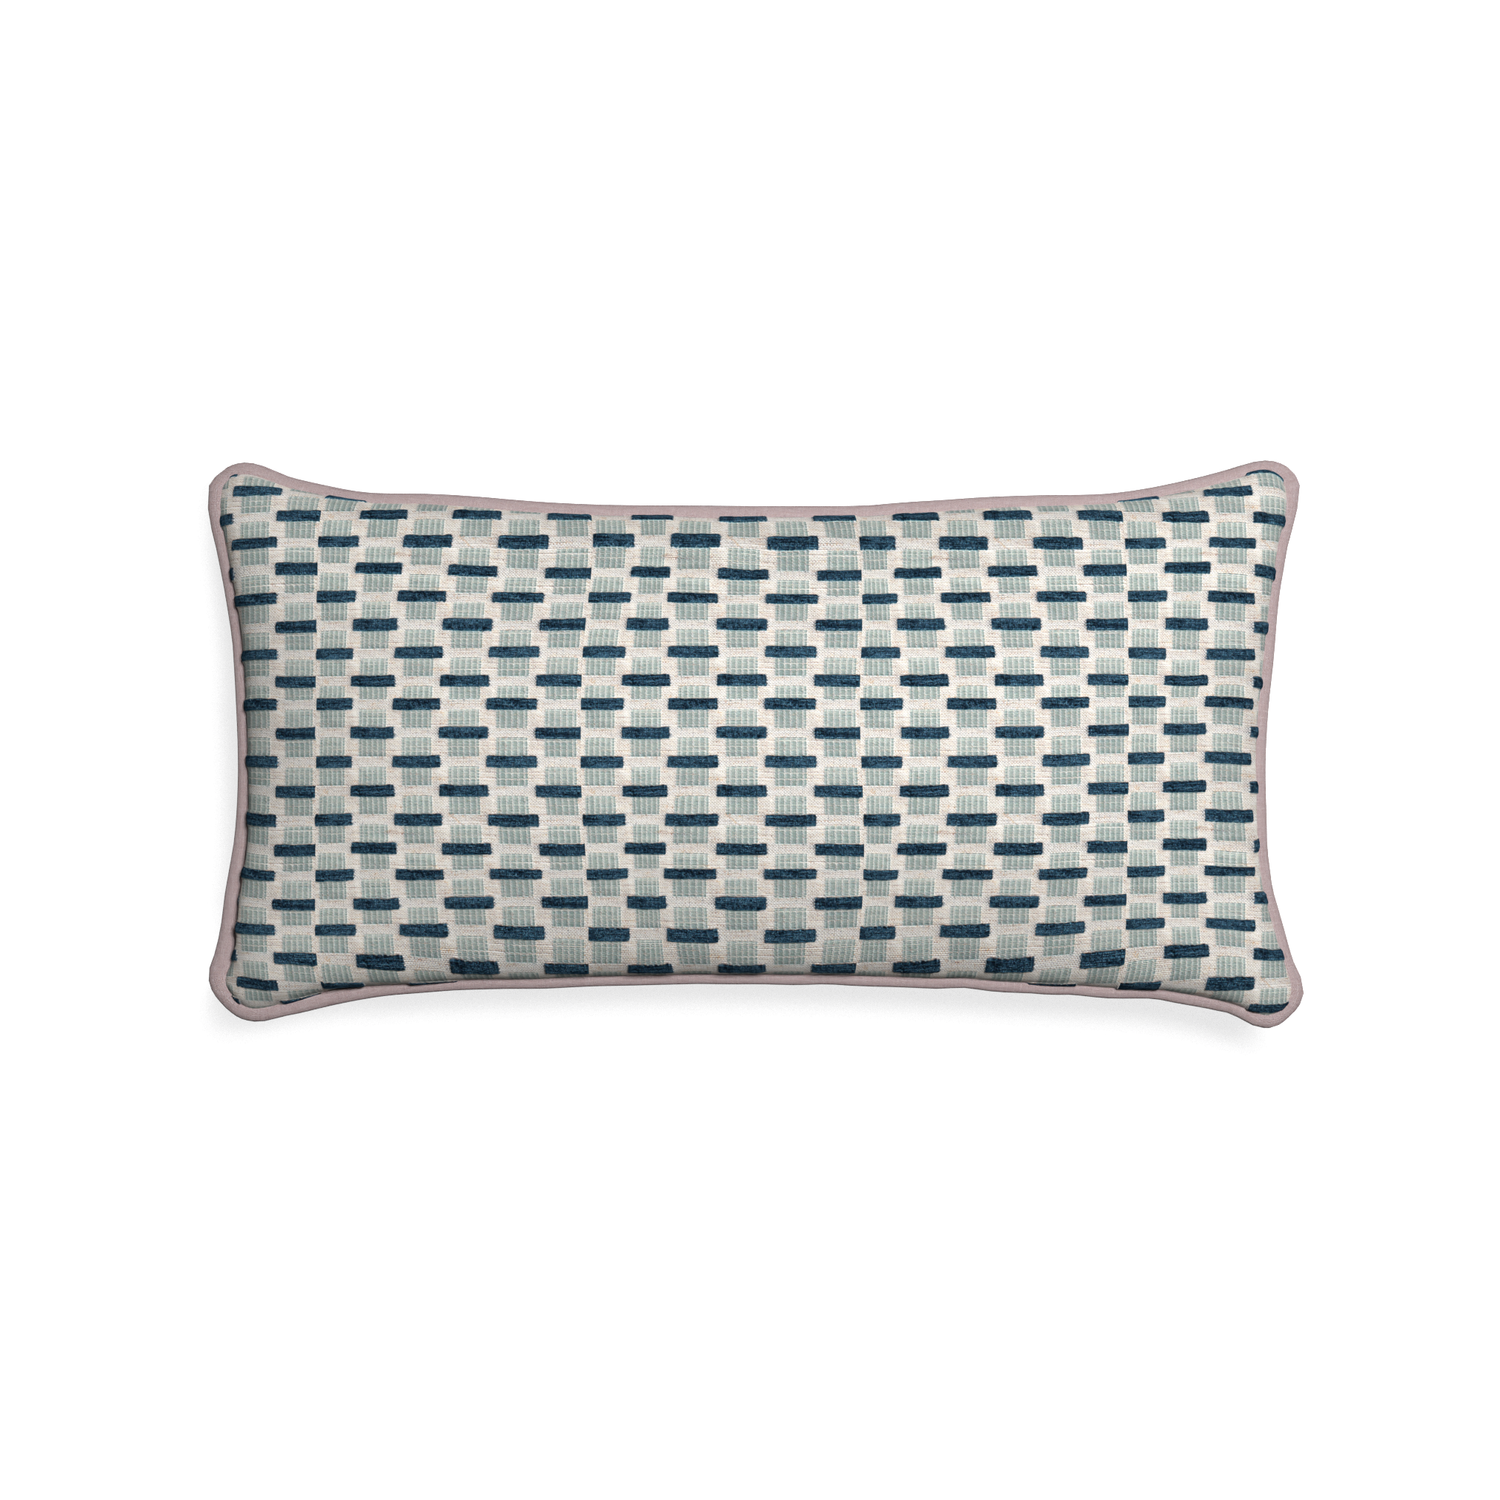 Midi-lumbar willow amalfi custom blue geometric chenillepillow with orchid piping on white background